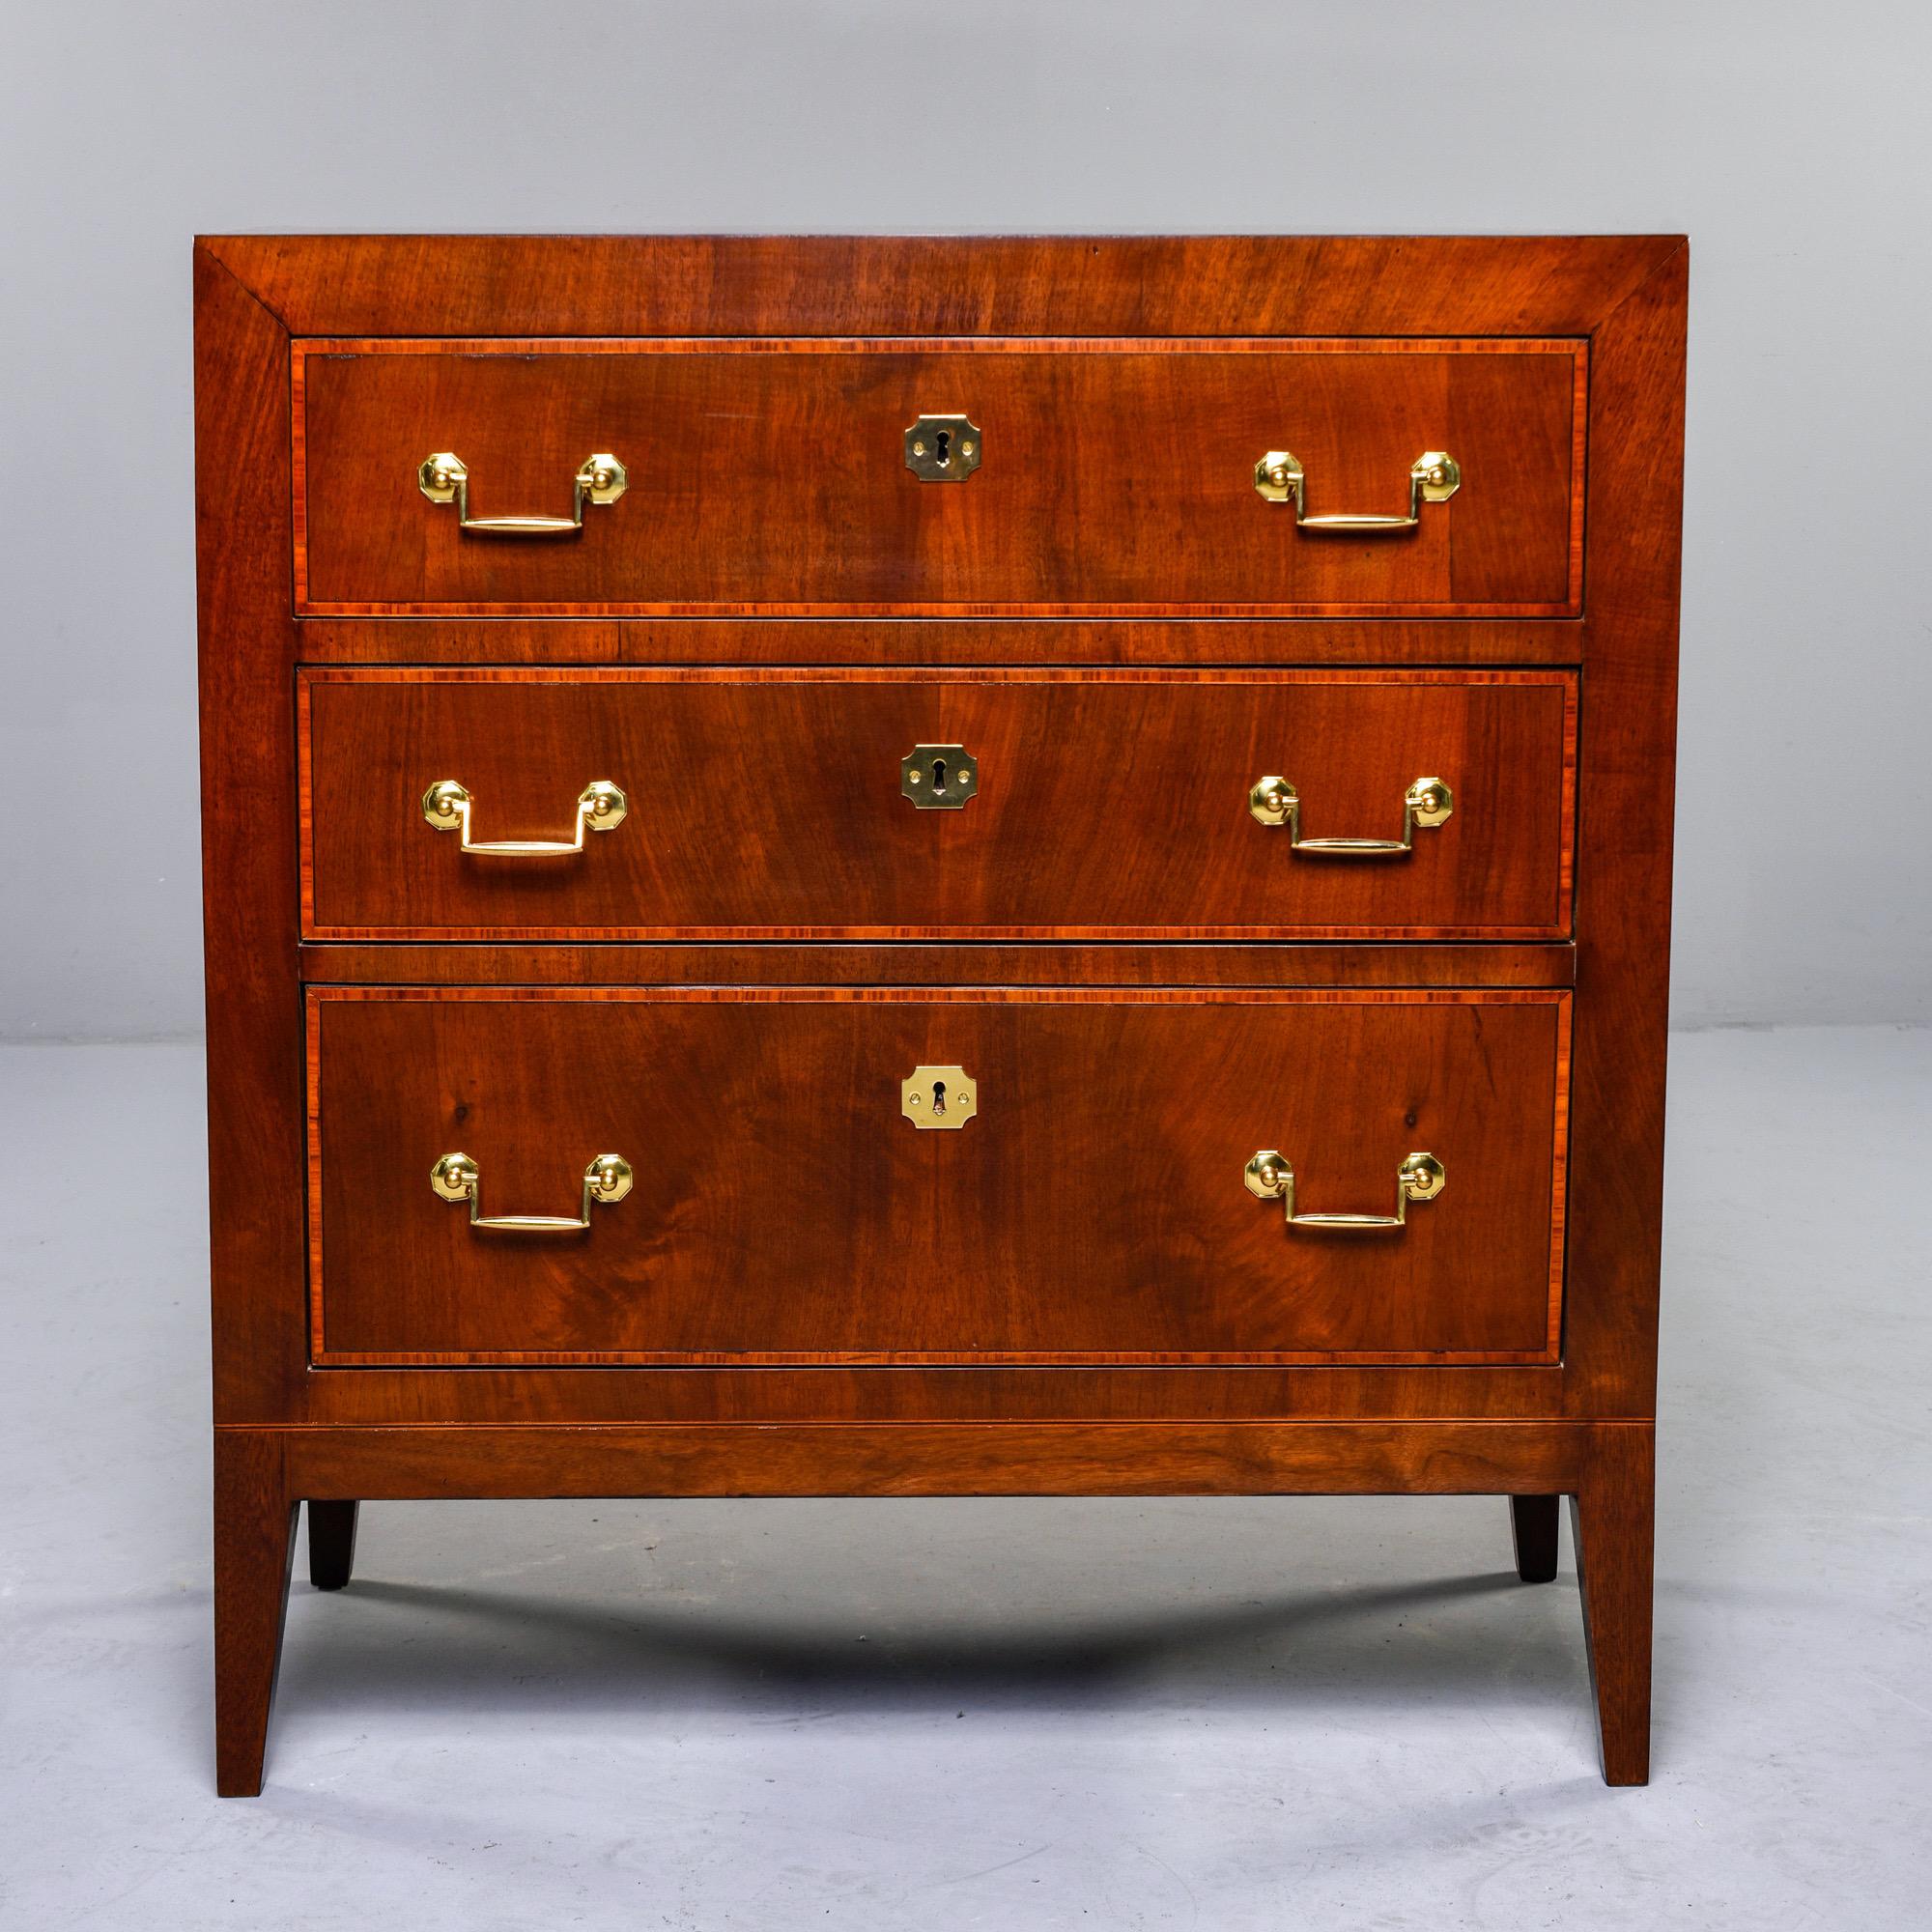 Circa 1920s English chest of three drawers with brass hardware. Dovetail construction, contrasting inlay details on drawer fronts, sides and top of chest. Unknown maker.